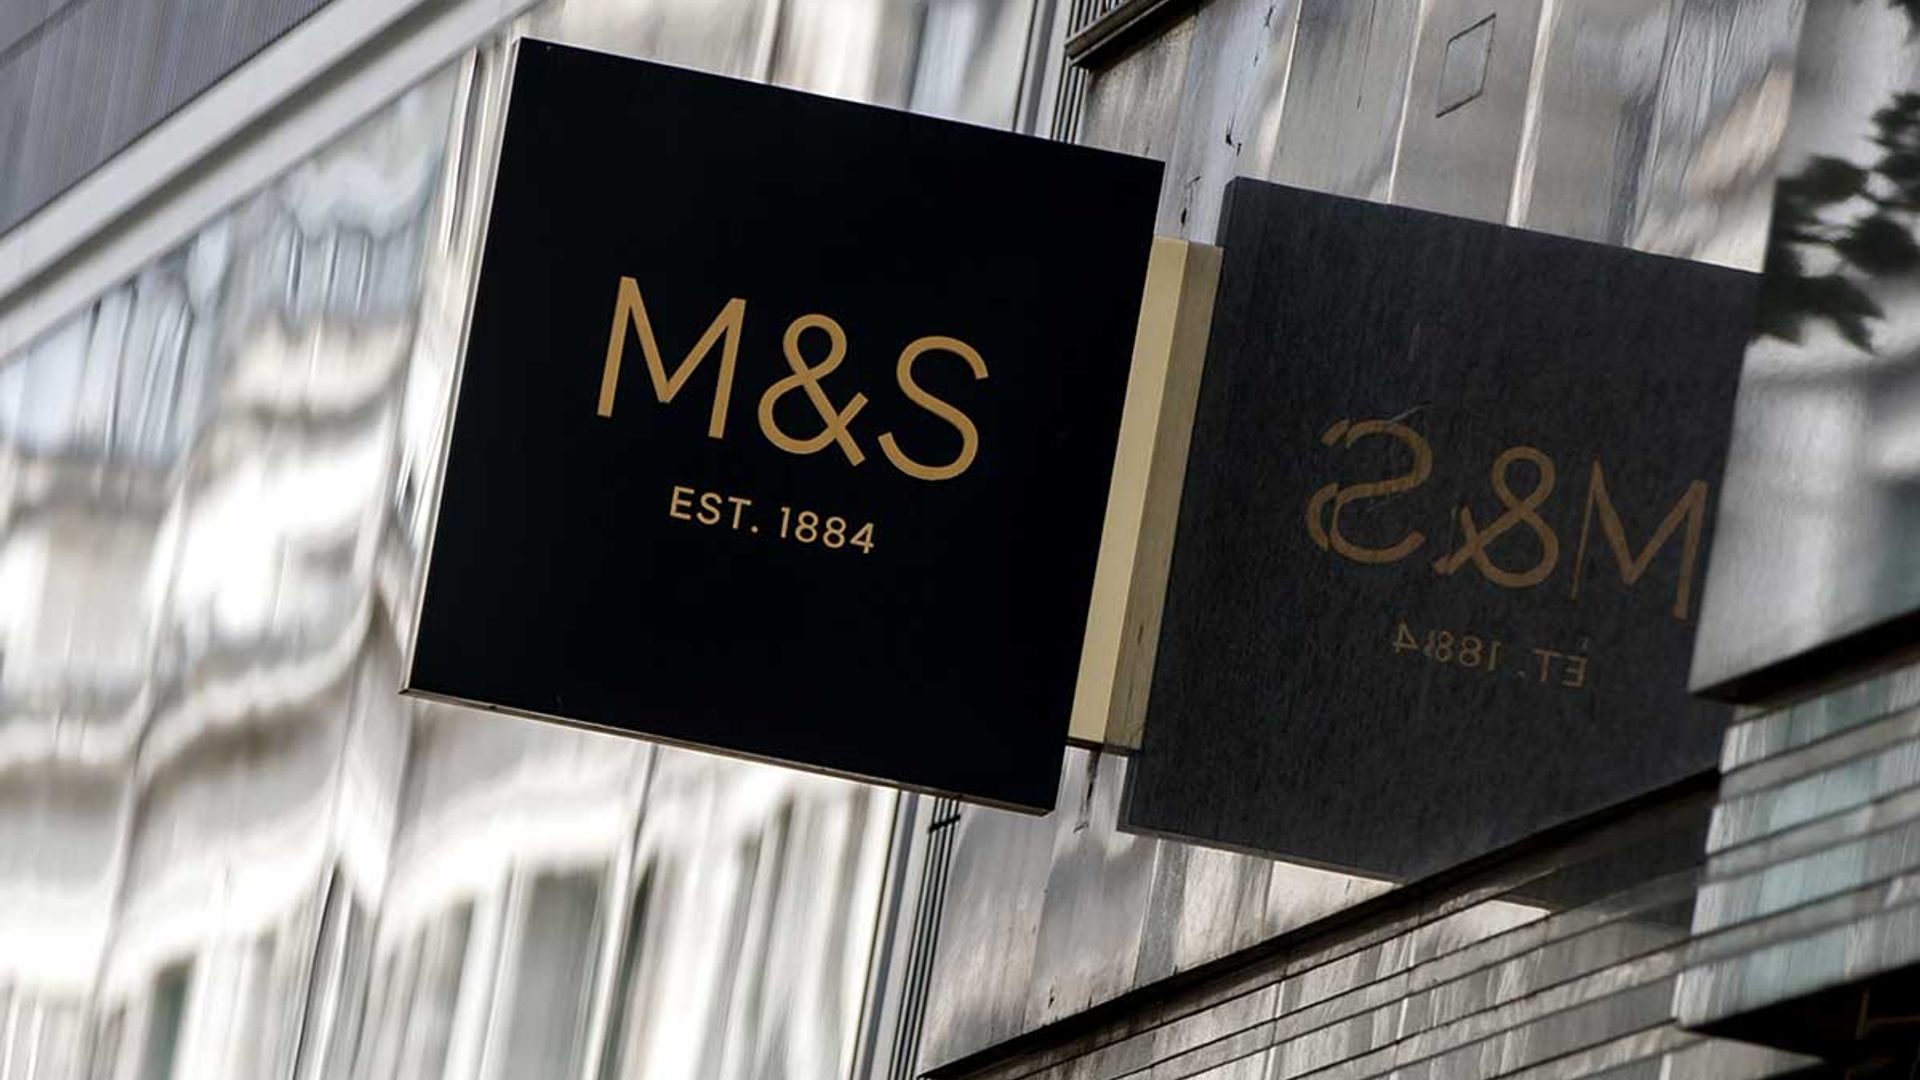 M&S just dropped a flash sale with up to 50% discounts